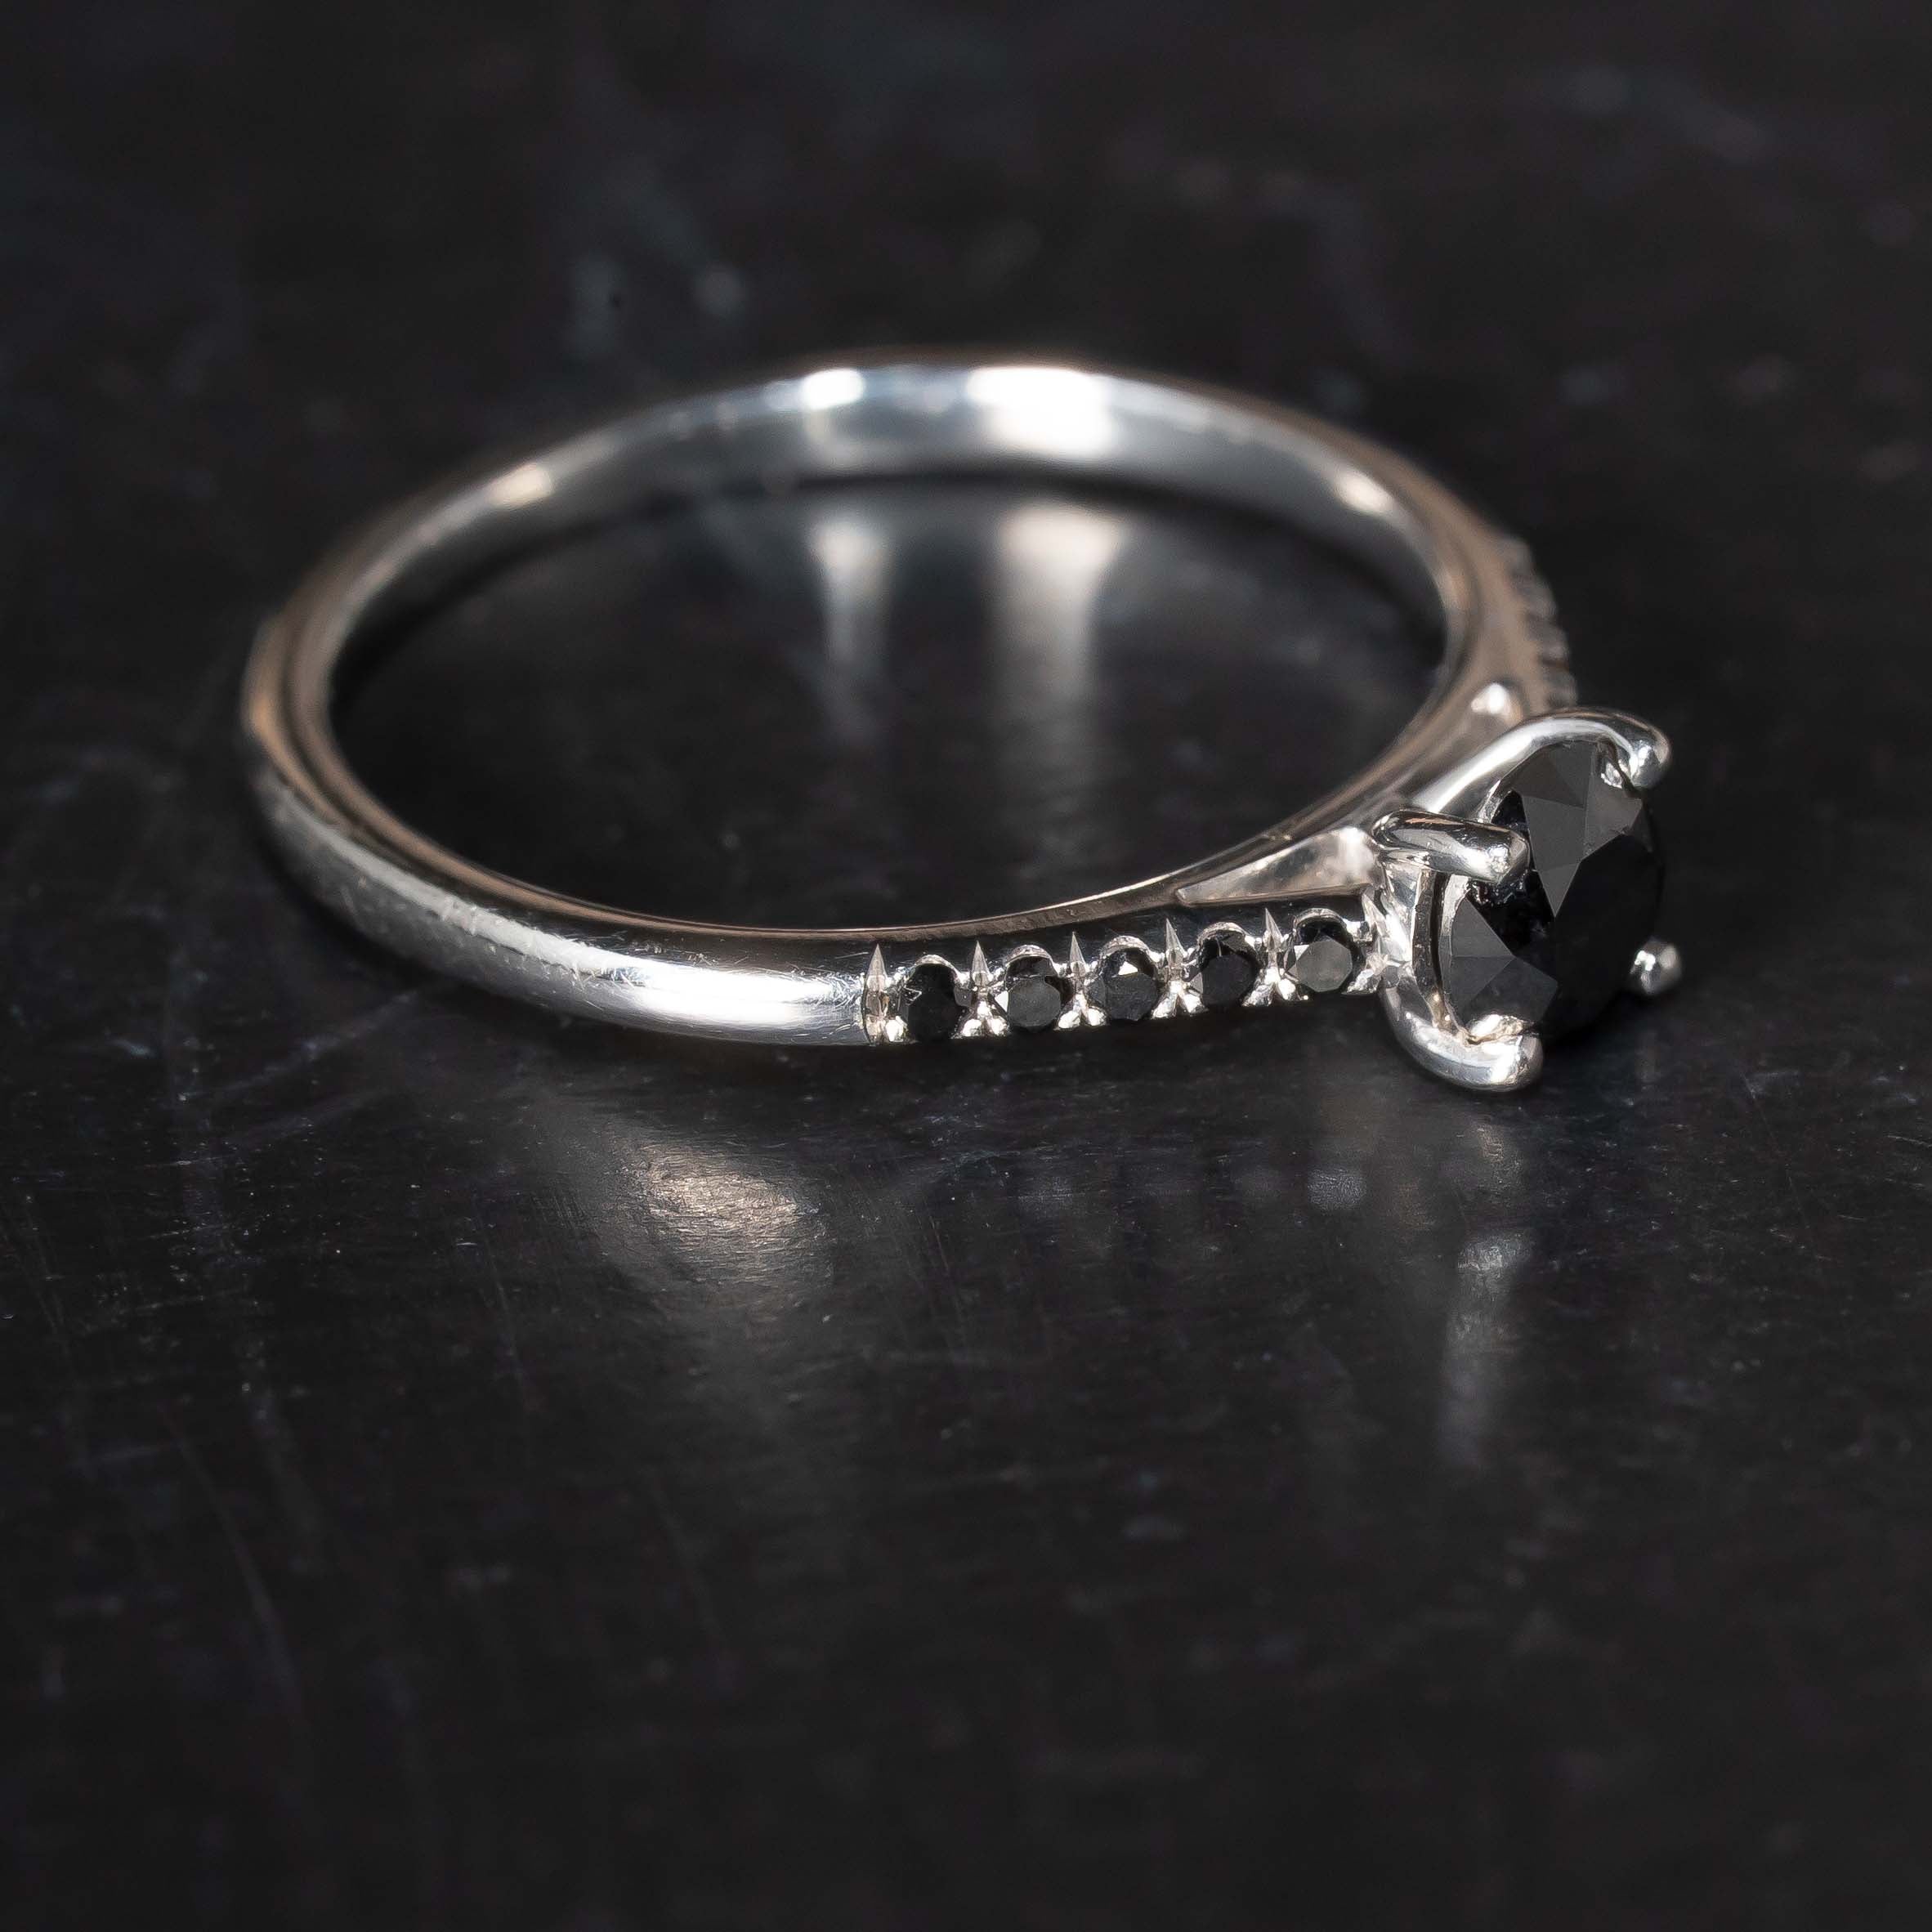 Side view of the Midnight Rites Black Diamond Ring